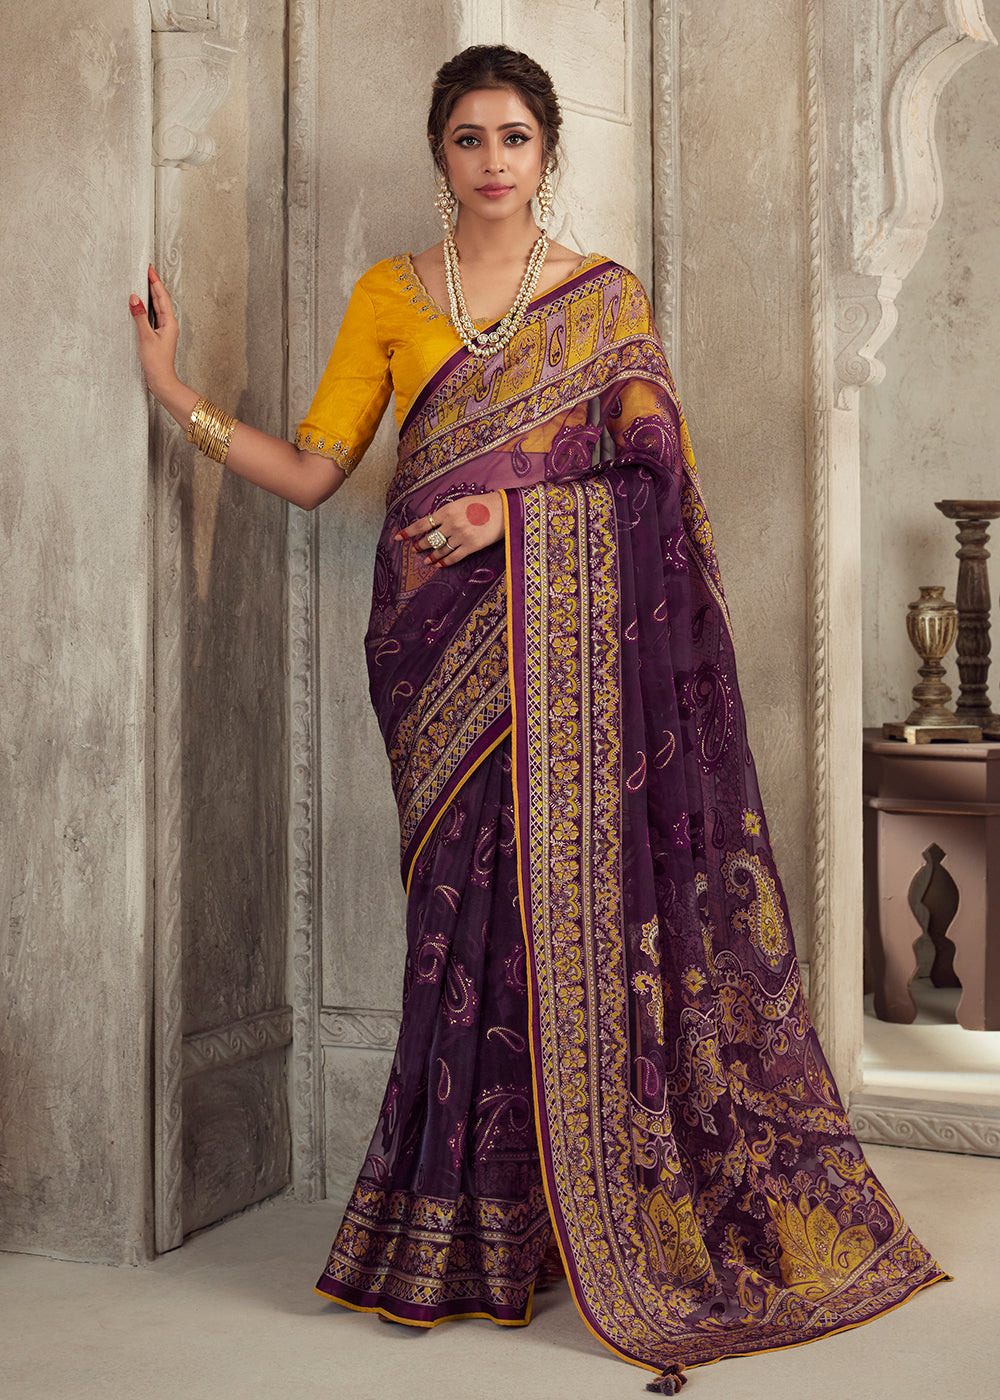 Buy Now Plum Soft Organza Brasso Embroidered Wedding Festive Saree Online in USA, UK, Canada & Worldwide at Empress Clothing.